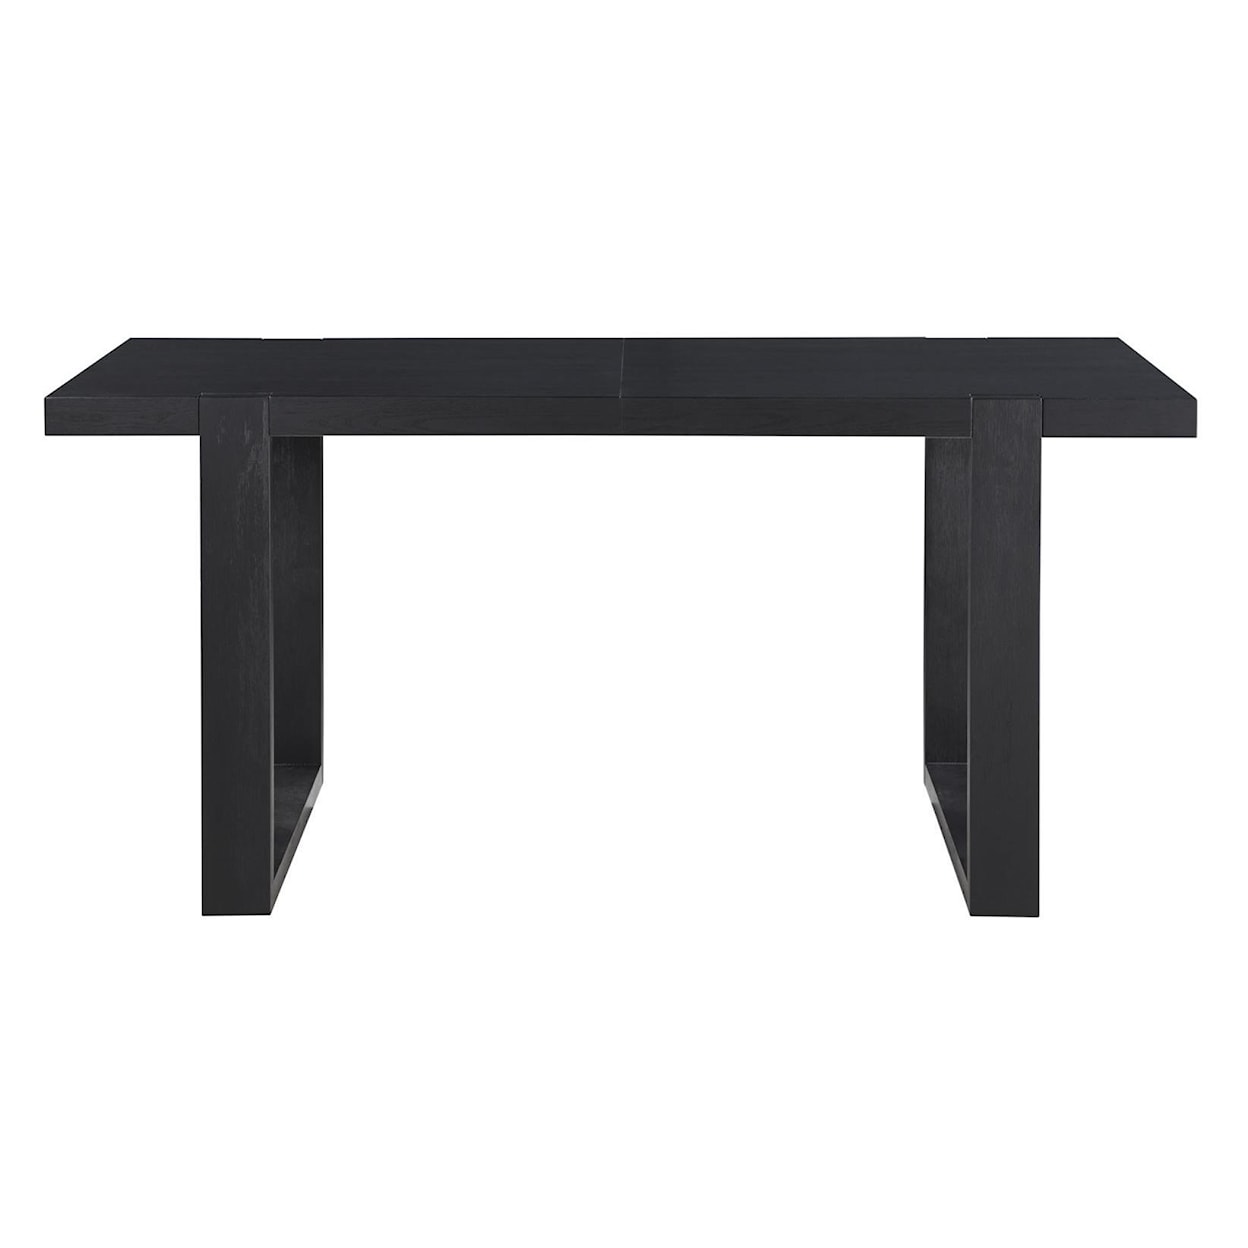 Prime Yves Counter Height Table